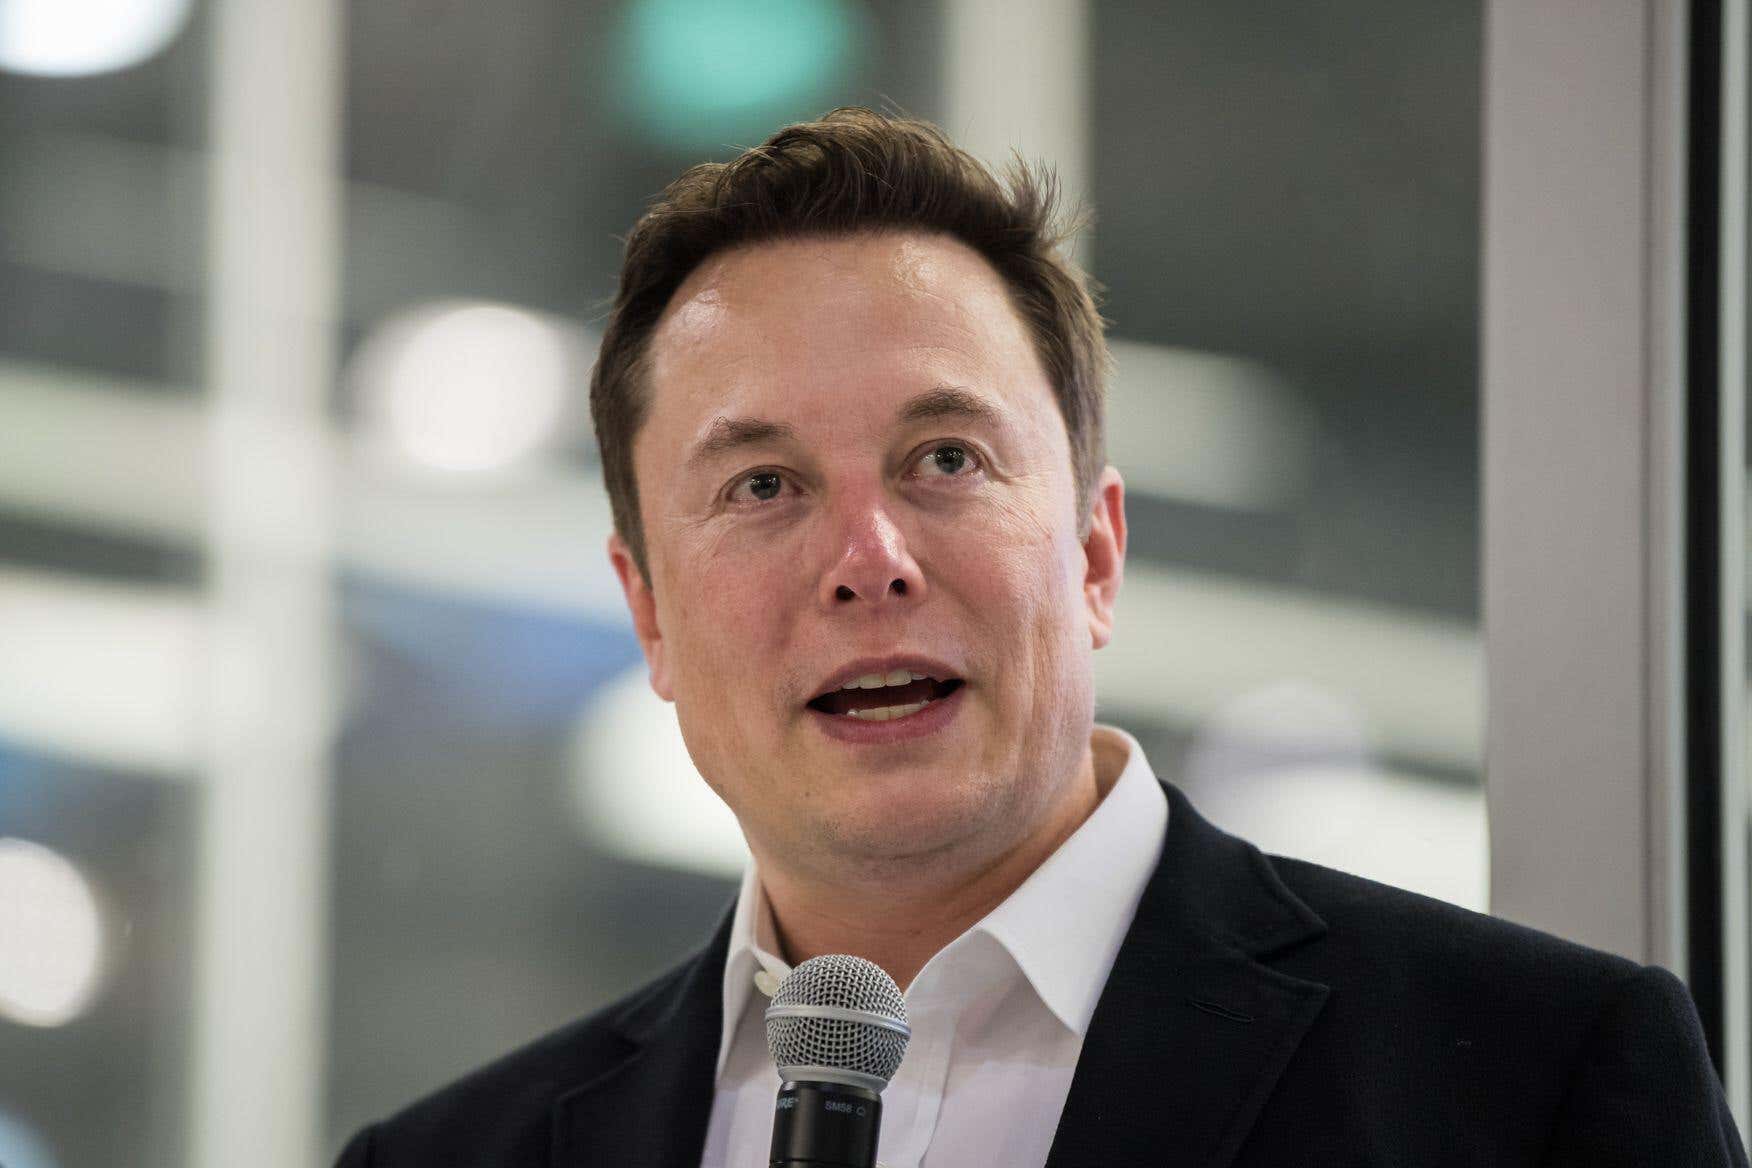 New Twitter owner Elon Musk has made it ‘super clear’ he has not yet made any changes to the social media platform’s content moderation policies (Alamy/PA)